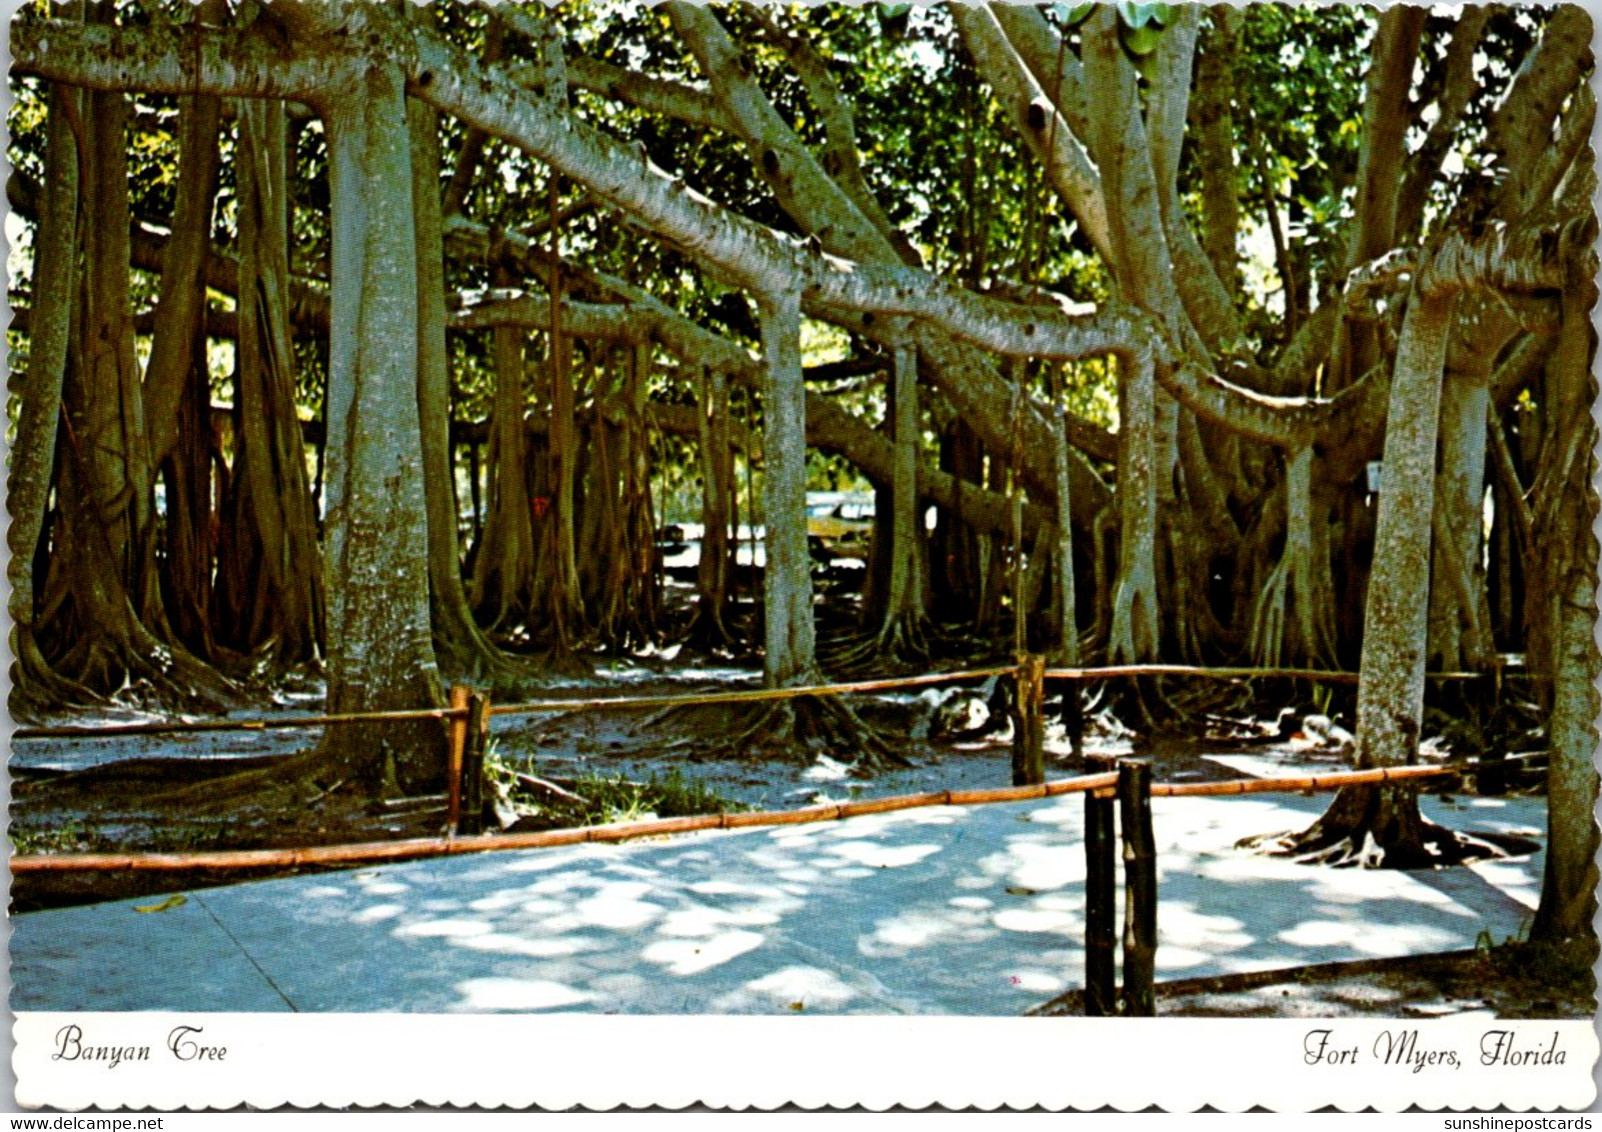 Florida Fort Myers Edison Winter Home The Banyan Tree - Fort Myers